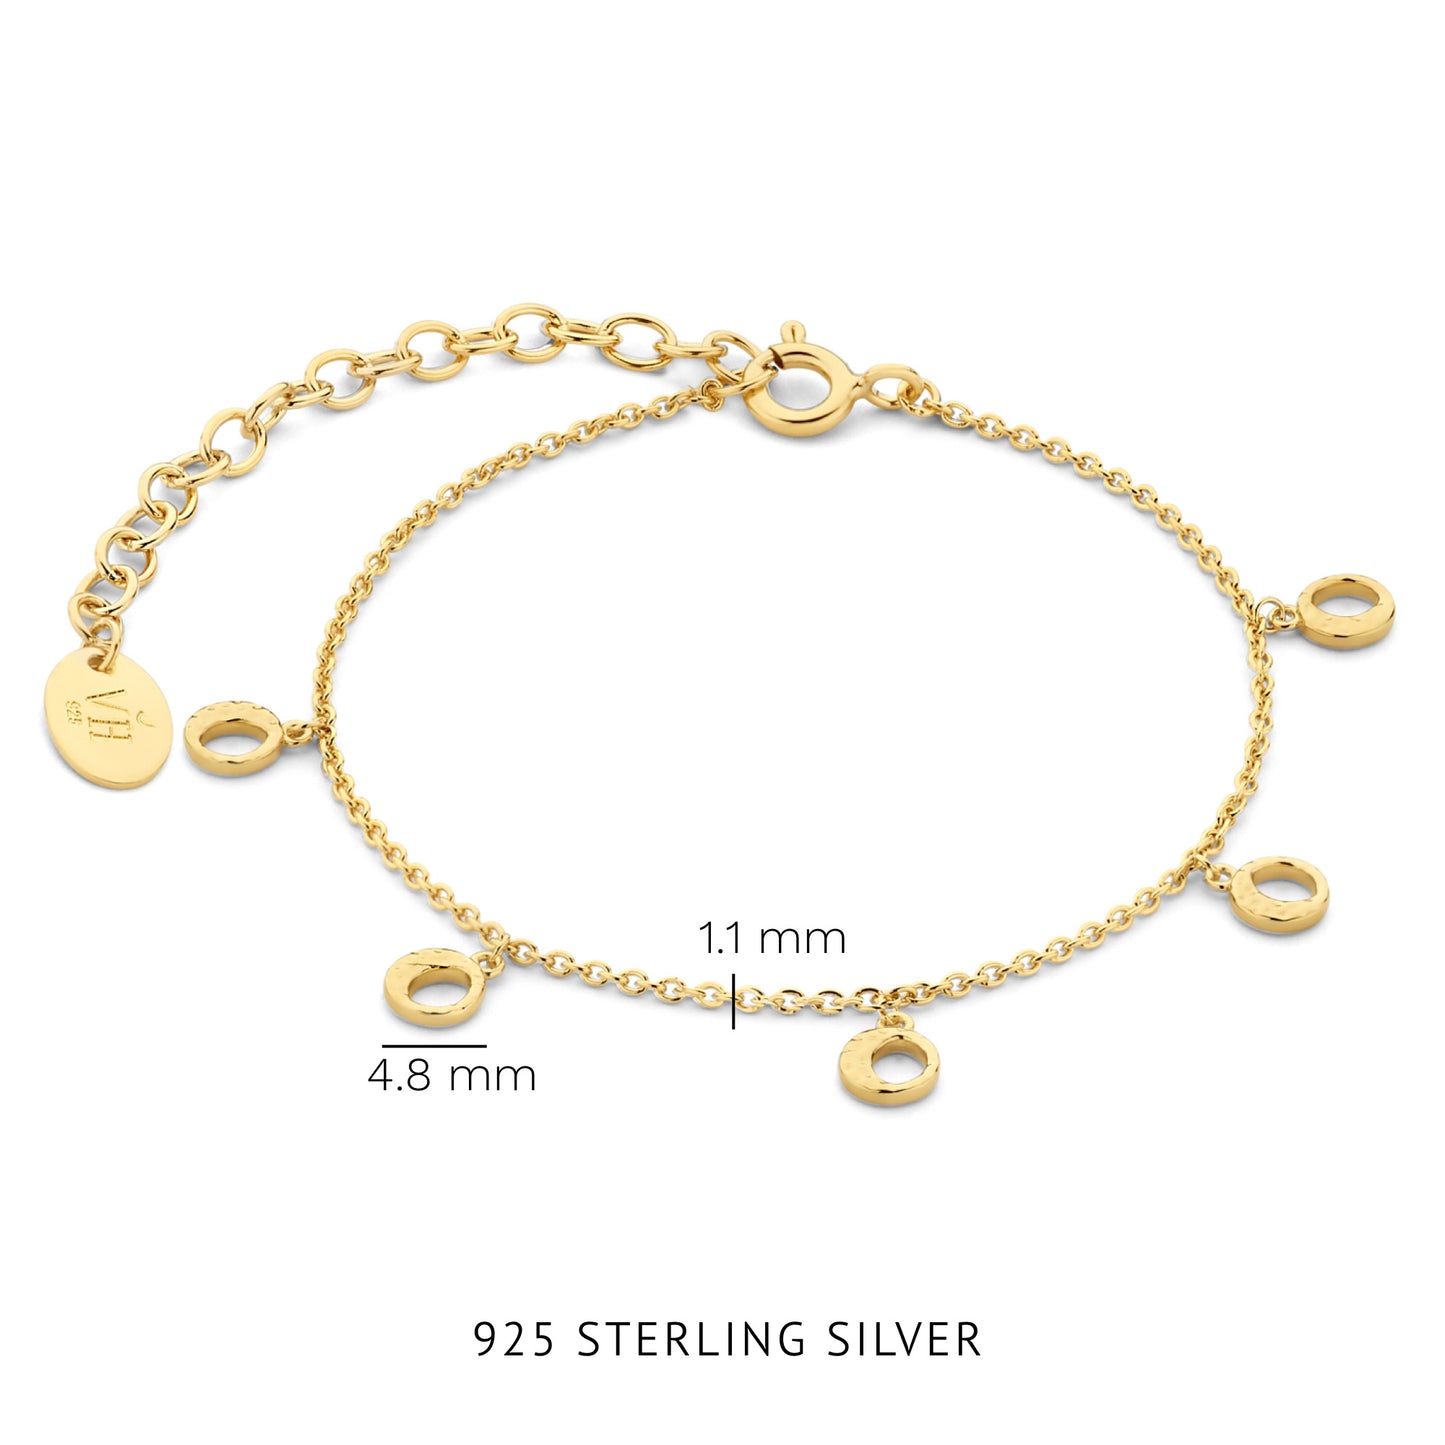 Luna 925 sterling silver gold plated bracelet with moons